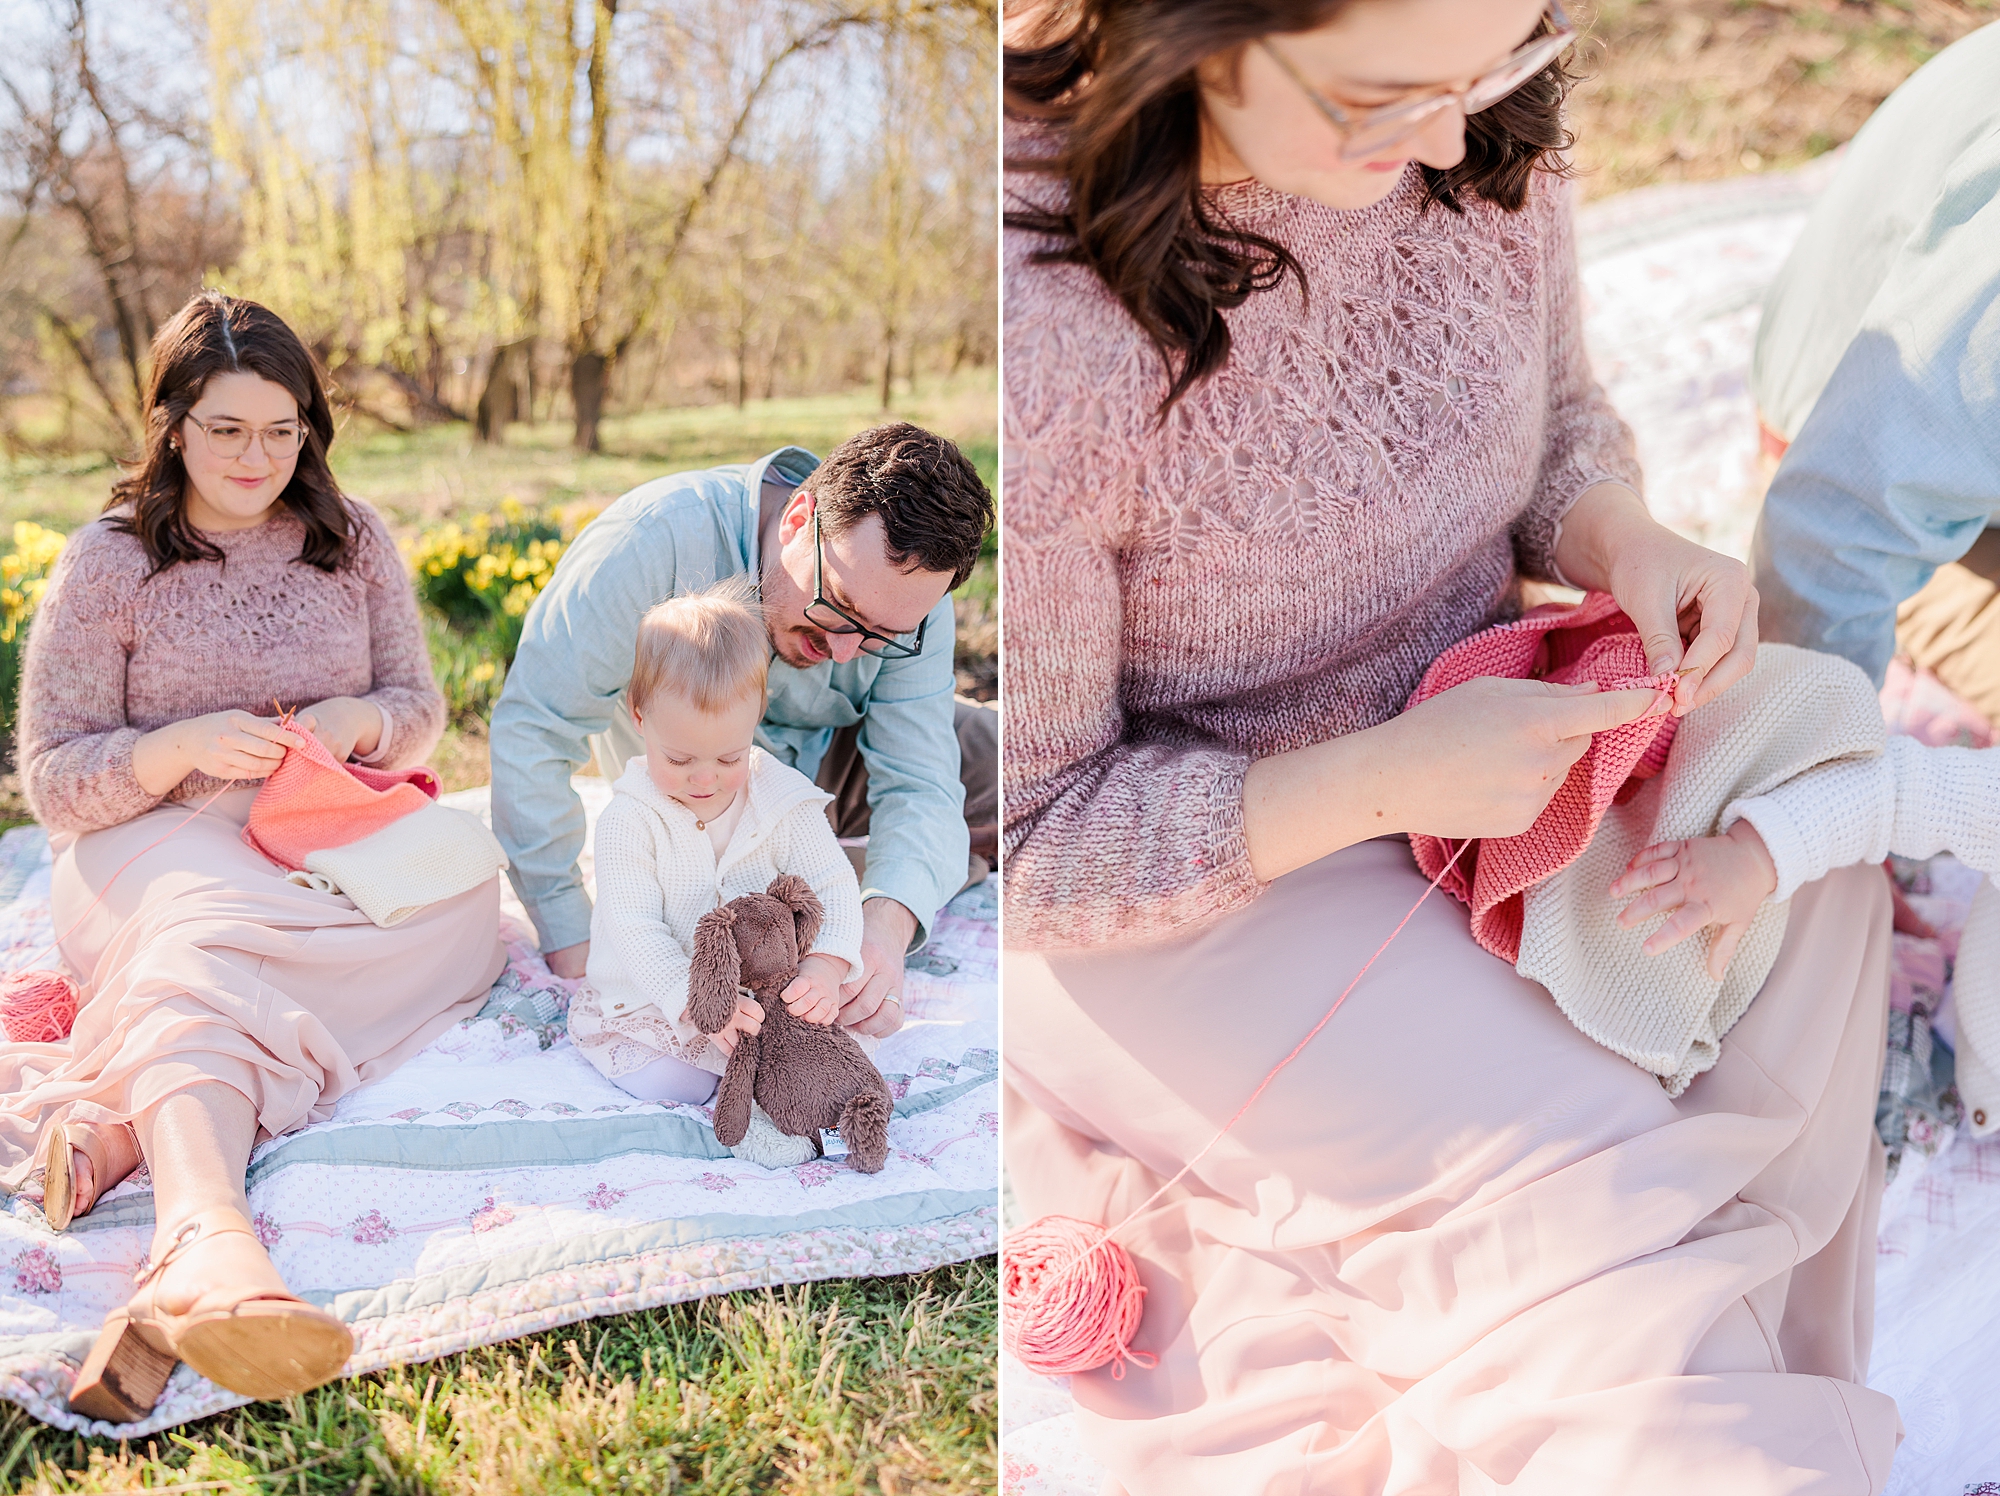 woman in pink maternity gown sits on lawn and knits baby sweater 